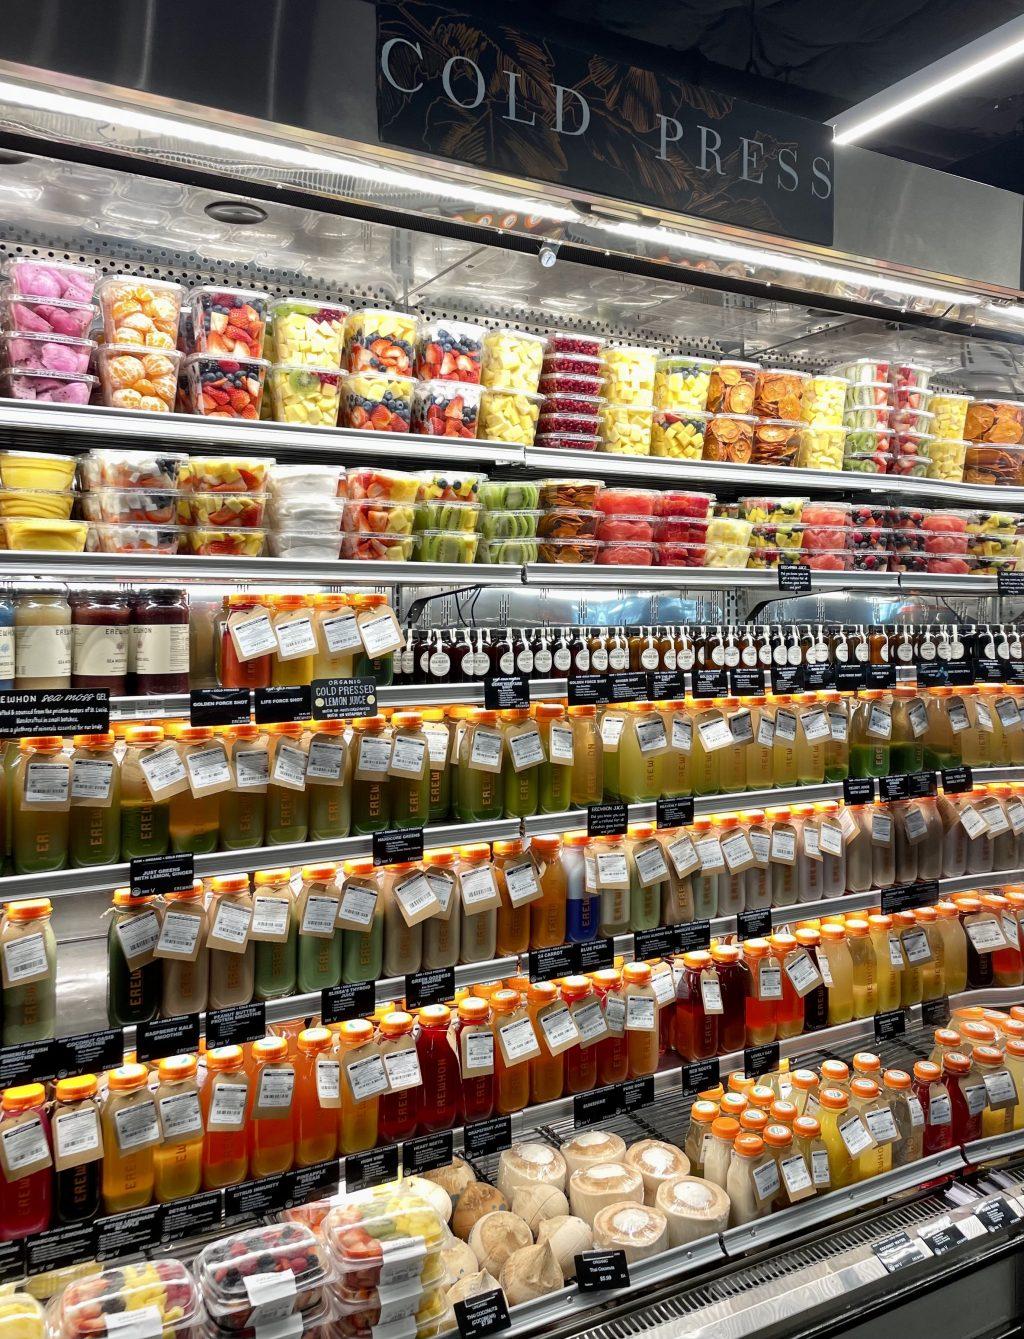 Erewhon's fully stocked cold case contains a variety of nutrient-dense fresh-pressed juices and smoothies as well as pre-cut fresh fruit. The store's pressed and fresh juices became a popular internet sensation after being promoted by multiple online influencers, according to The New York Times.